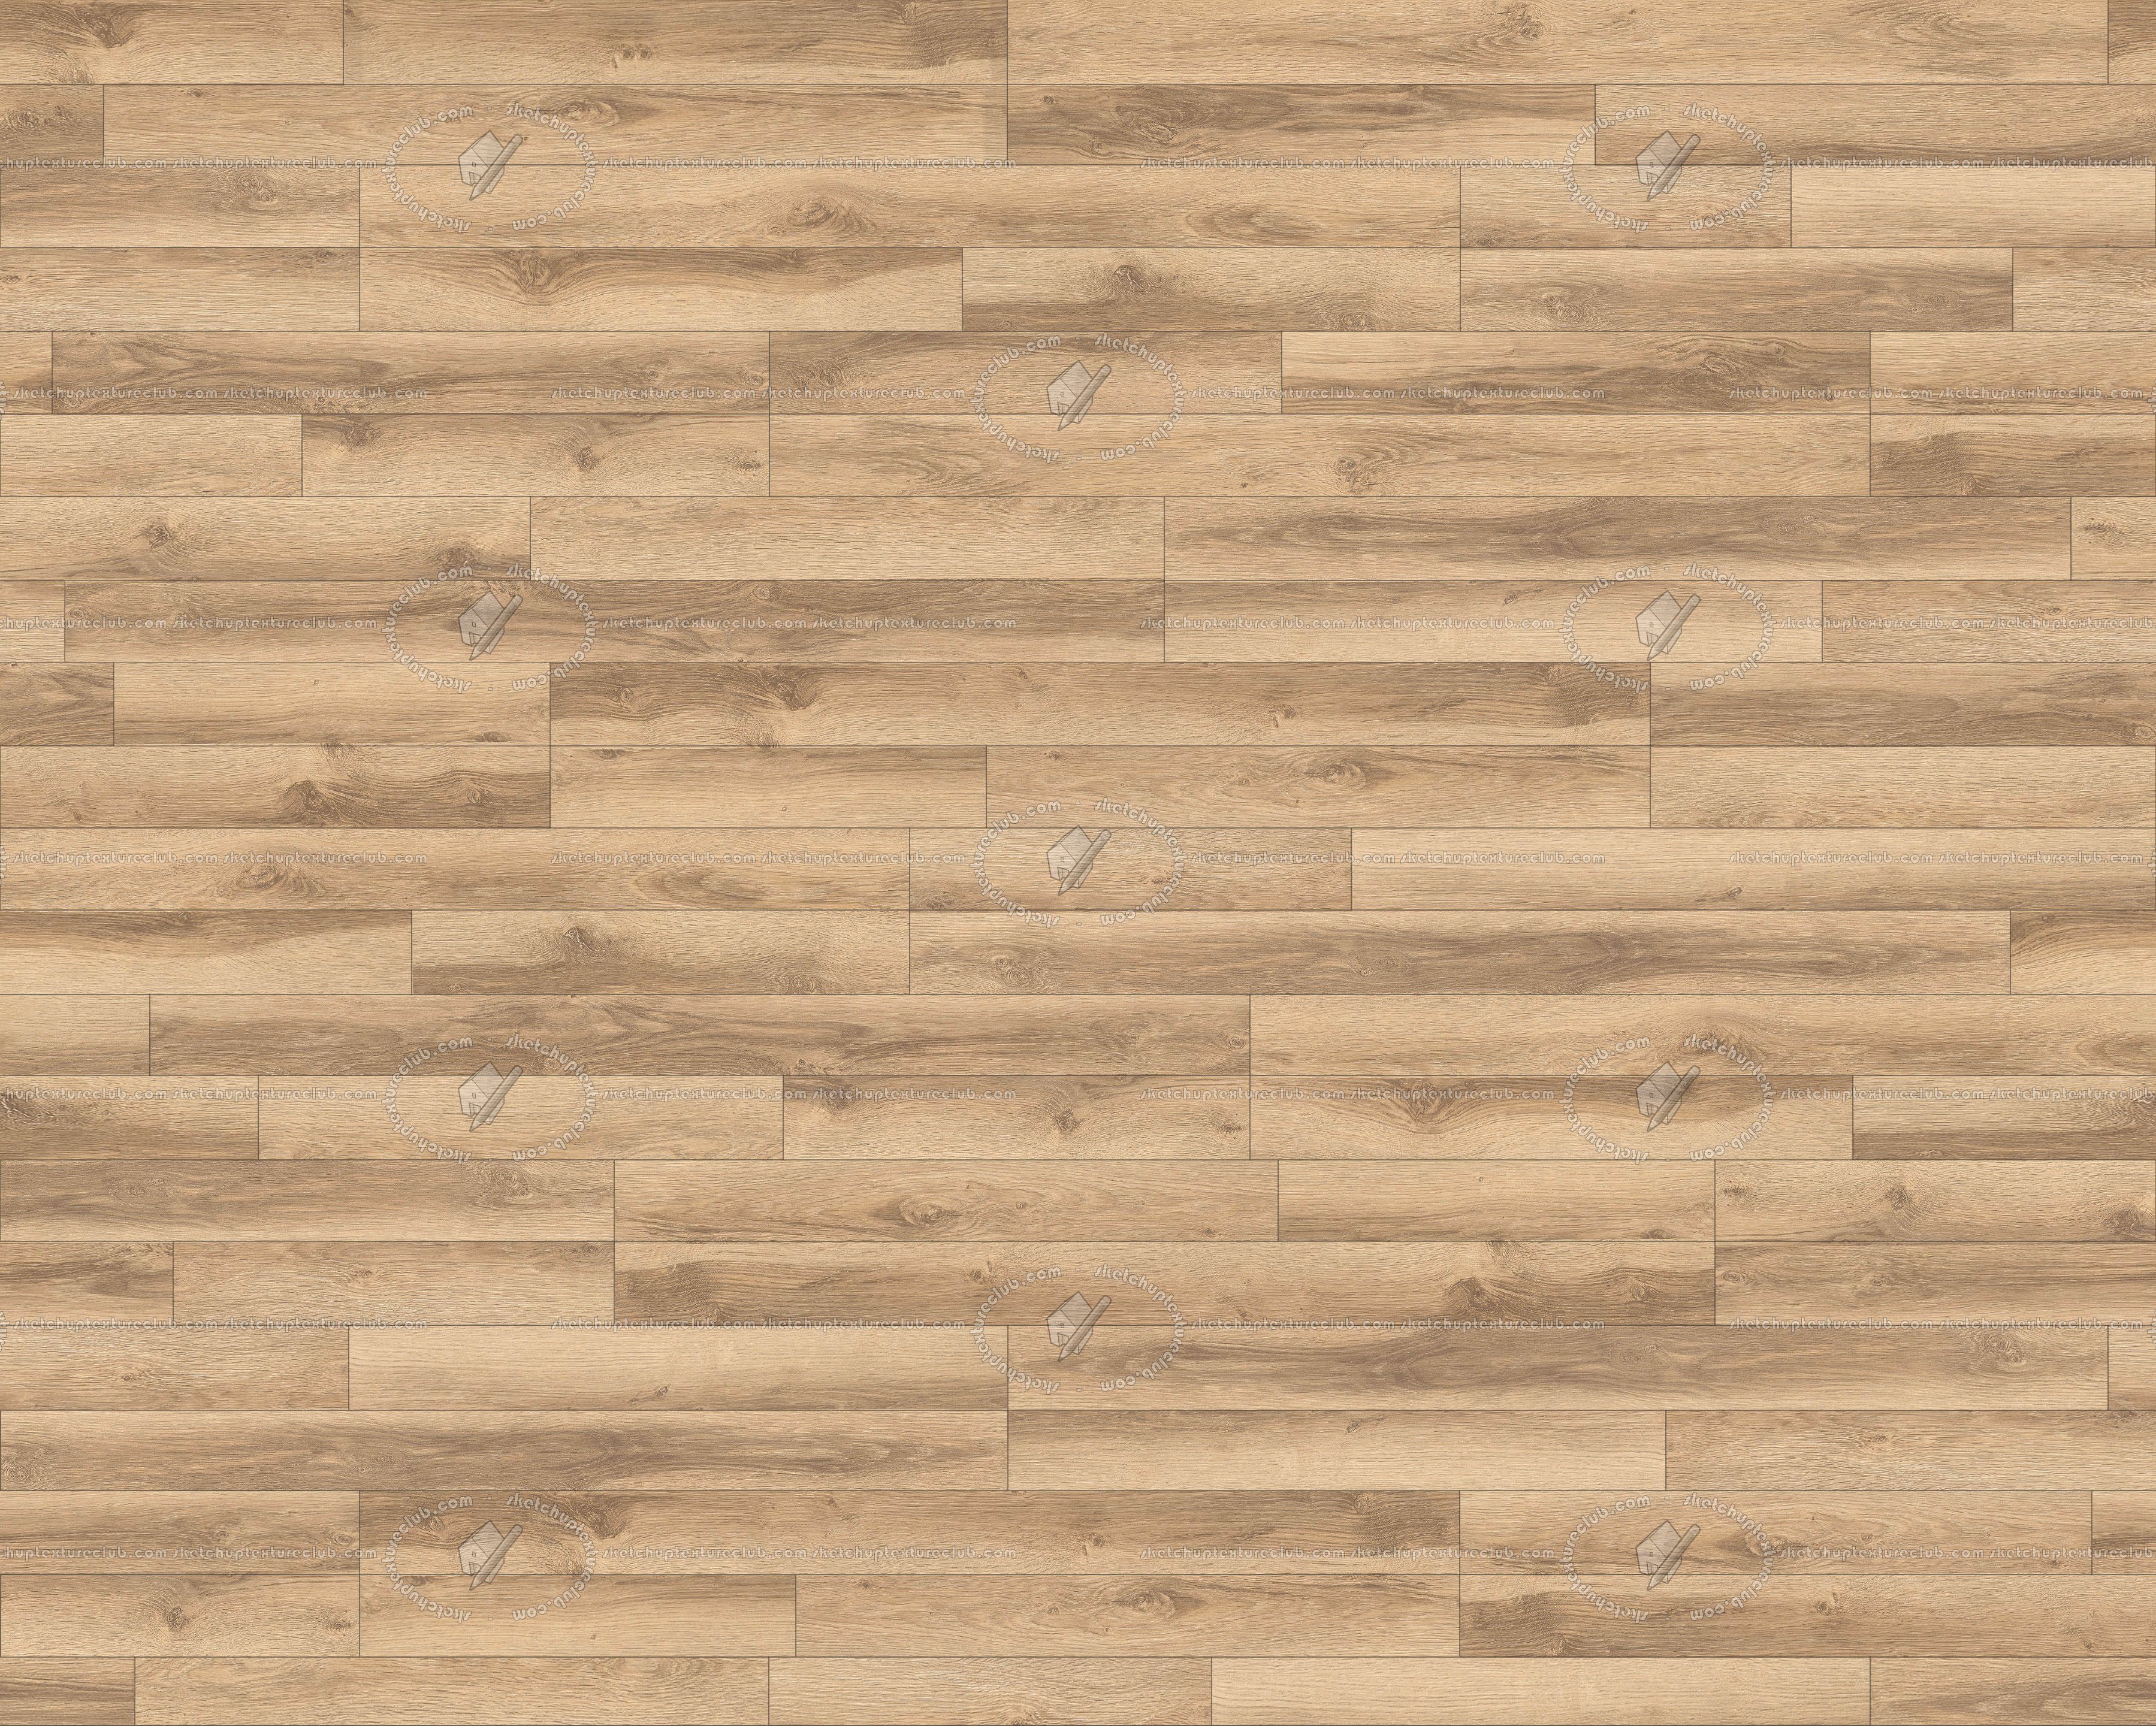 Free Textures Package 2018 00052, Wooden Laminate Flooring Texture